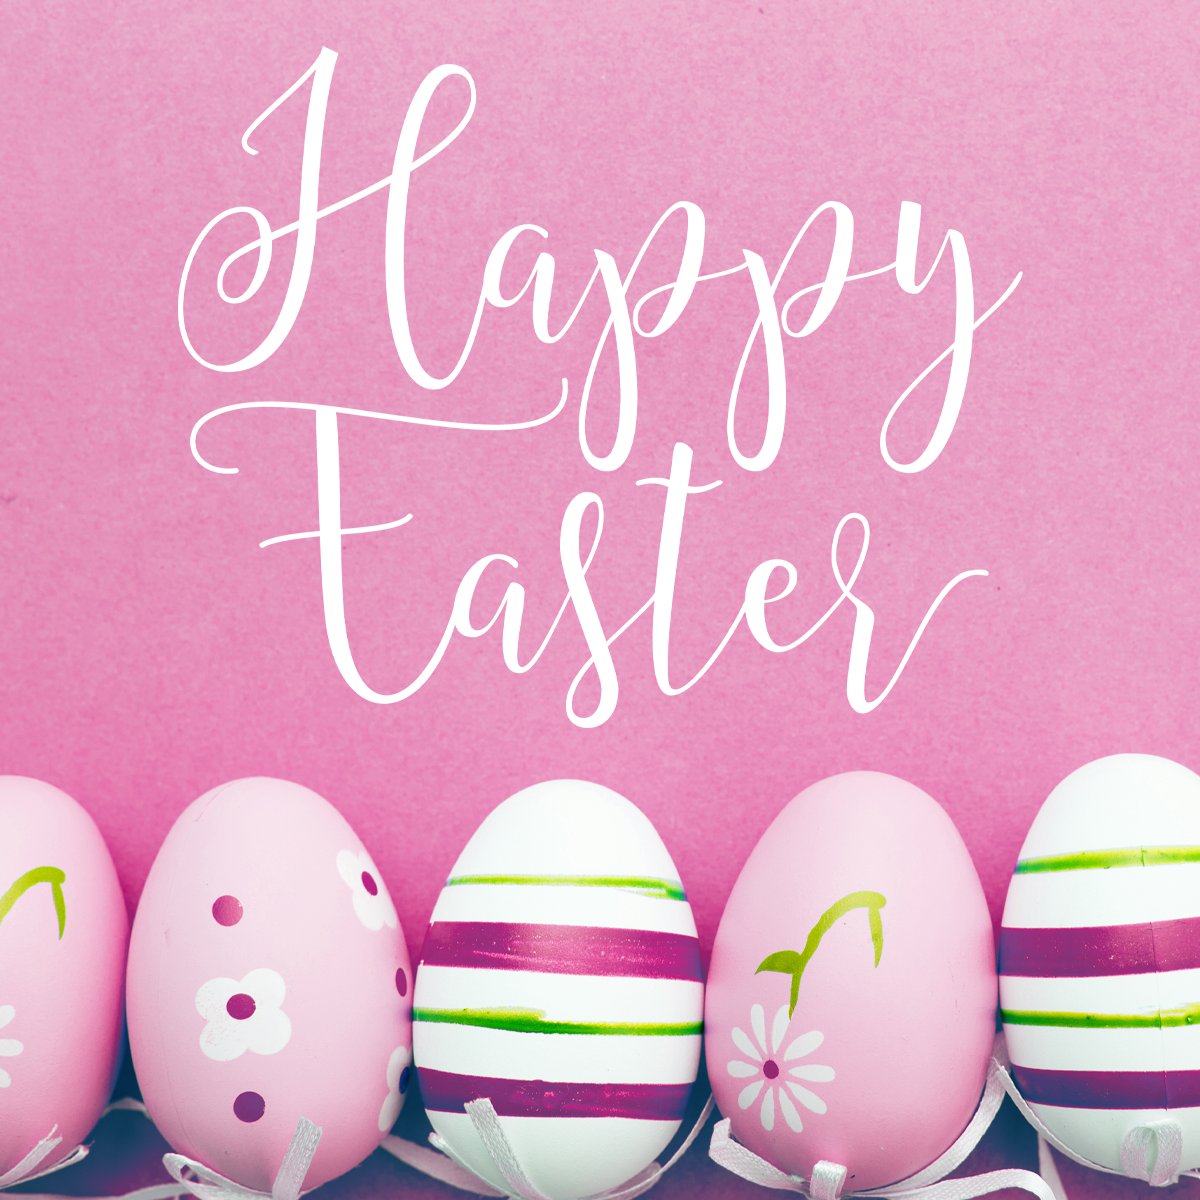 🐣🌷 Happy Easter from Guardian! 🏡🐰 May your day be filled with joy, laughter, & the warmth of loved ones. 🌟 As you celebrate this special day, remember to cherish every moment in your beautiful home. 🏠✨ Wishing you a blessed & egg-citing Easter! 🥚🎉 #HappyEaster #EasterJoy